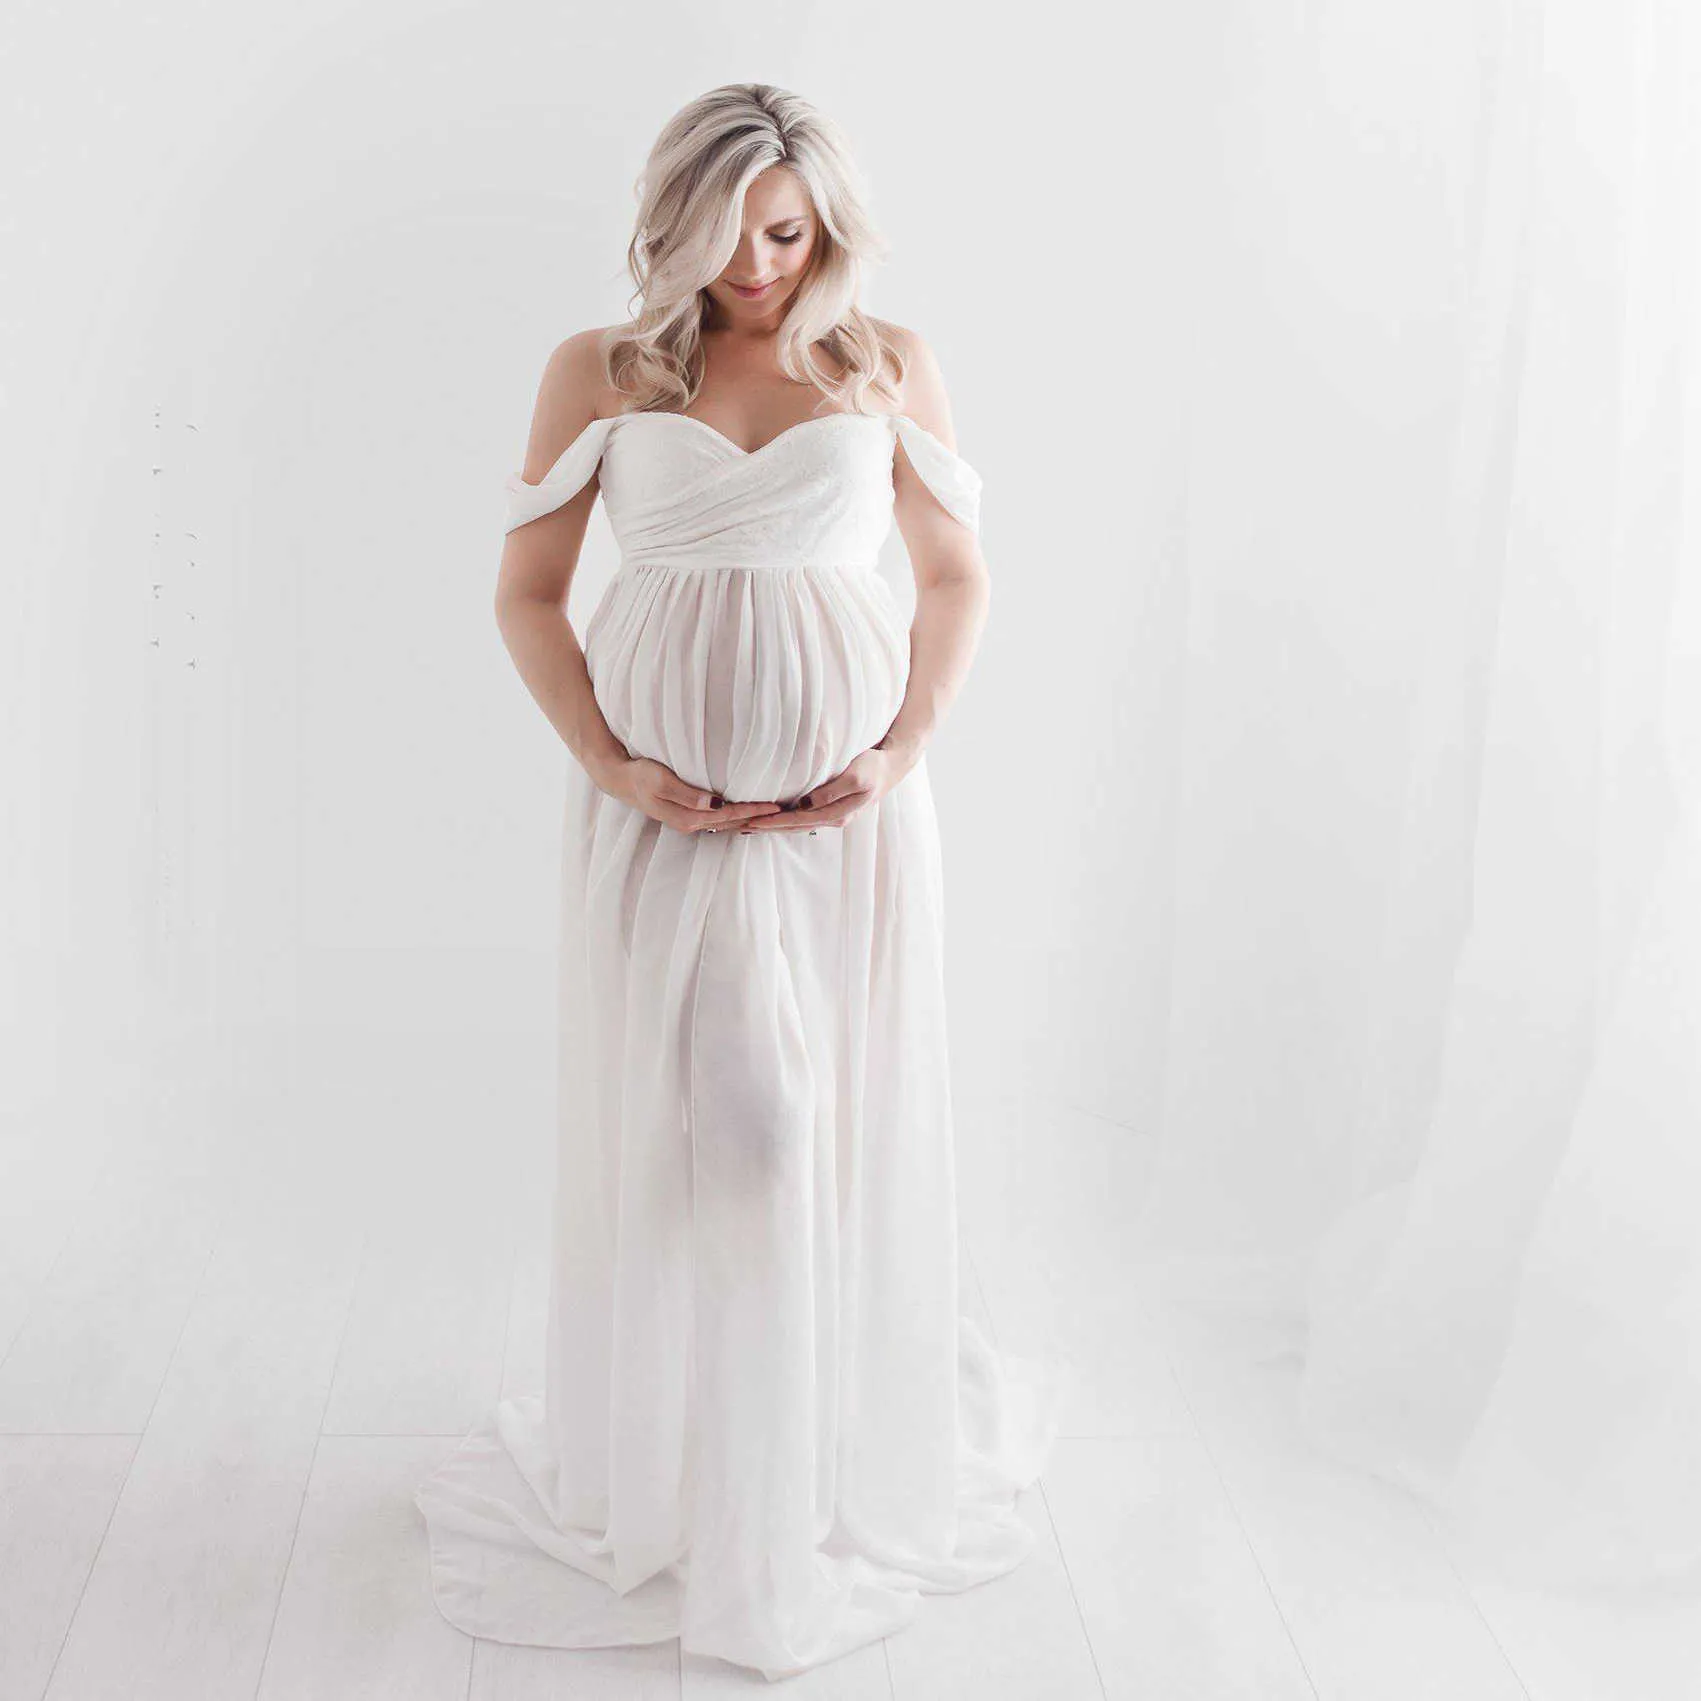 New Maternity Dresses For Photo Shoot Pregnant Women Opening Mop Long Skirt Dress Before Taking Pictures Pregnancy Wear